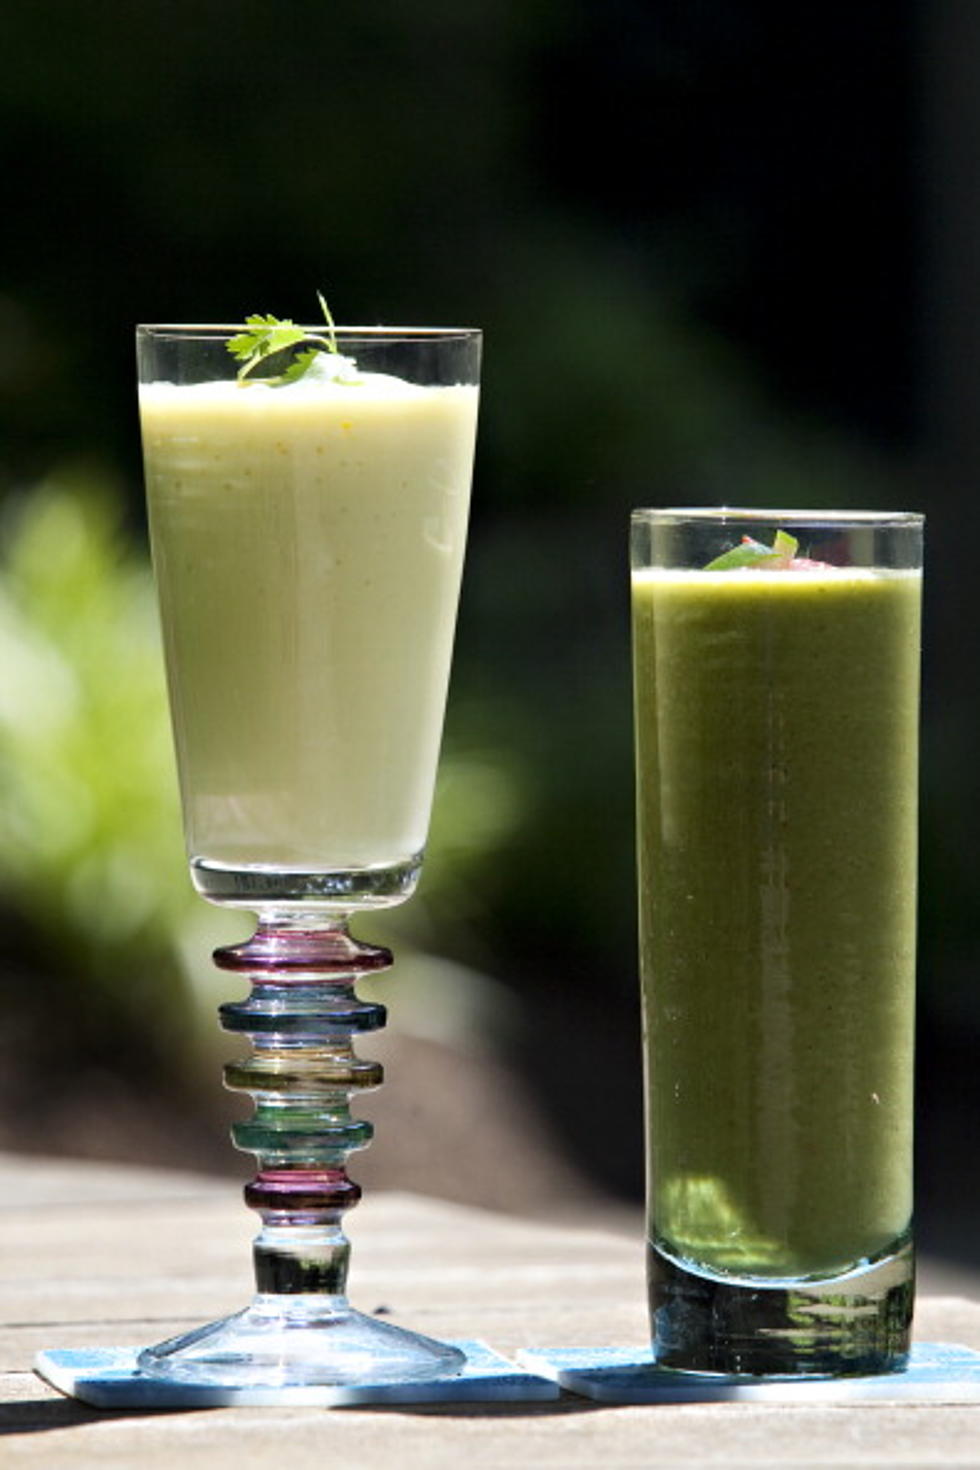 Green Smoothies Are The Healthiest!